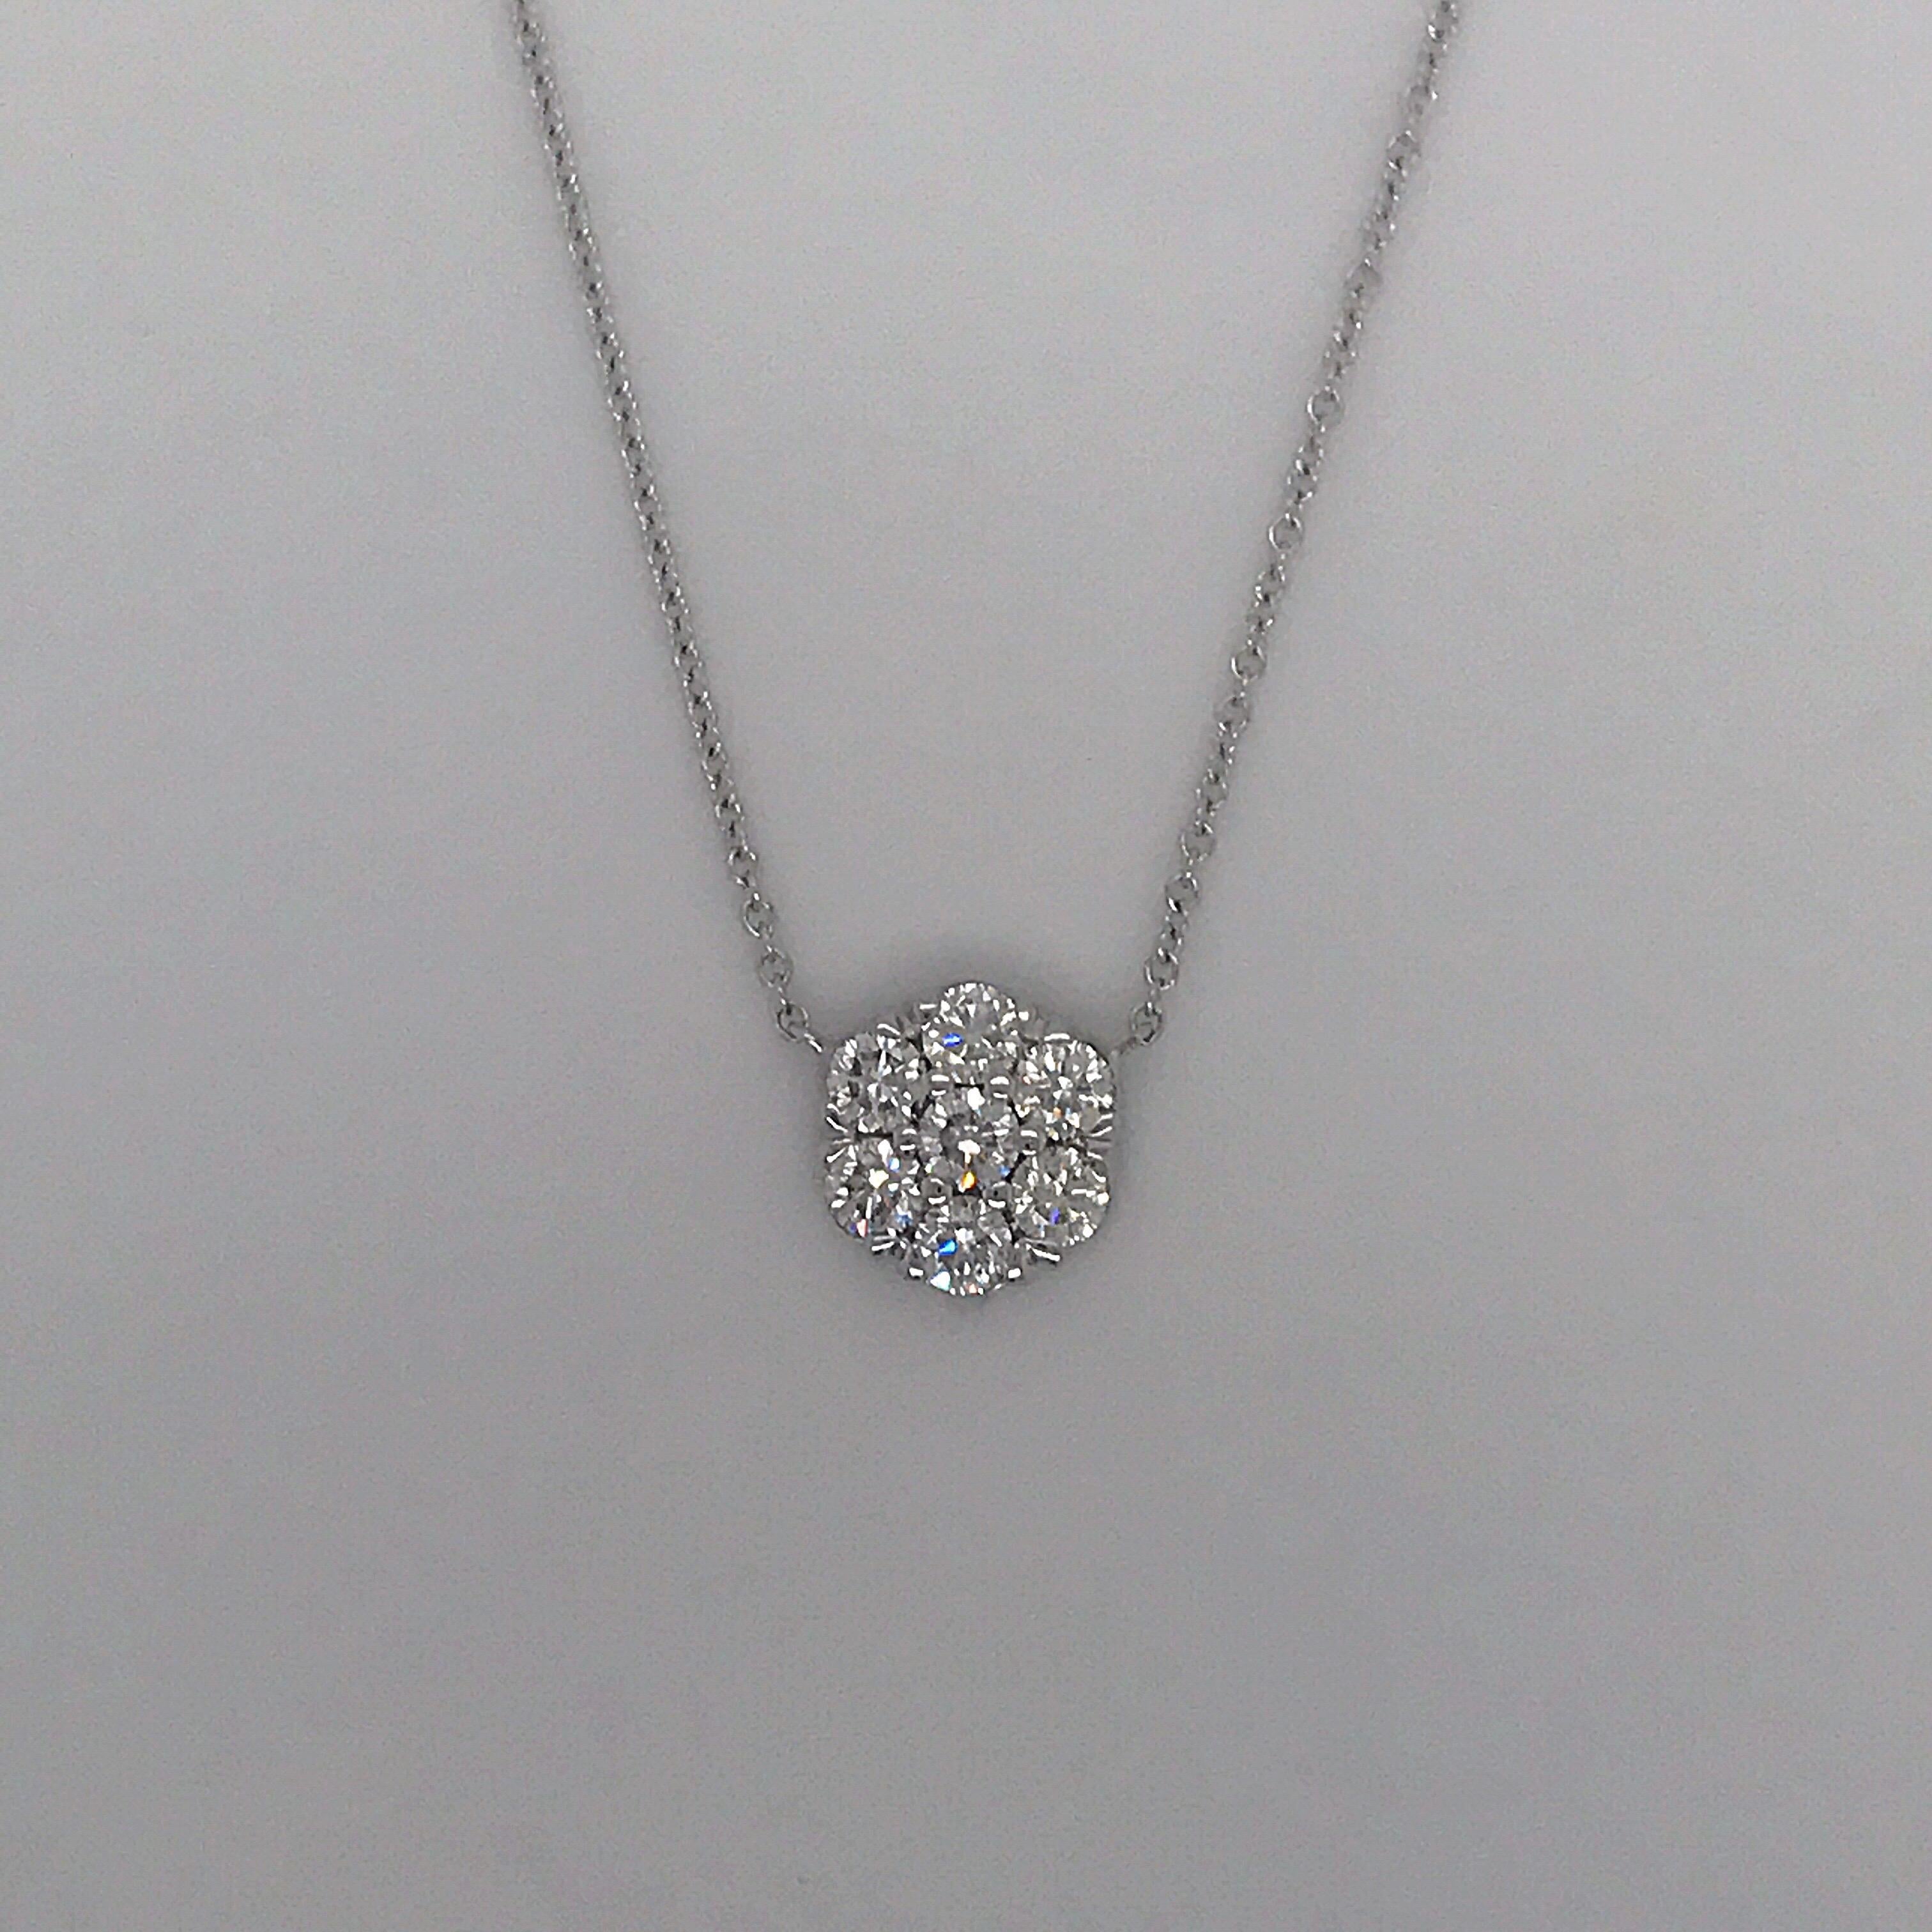 18K White gold pendant featuring 7 round brilliants weighing 1.04 carats in a floral cluster motif.
Color: H-I
Clarity: SI1-SI2

Available in any size, gemstone, and gold color. 